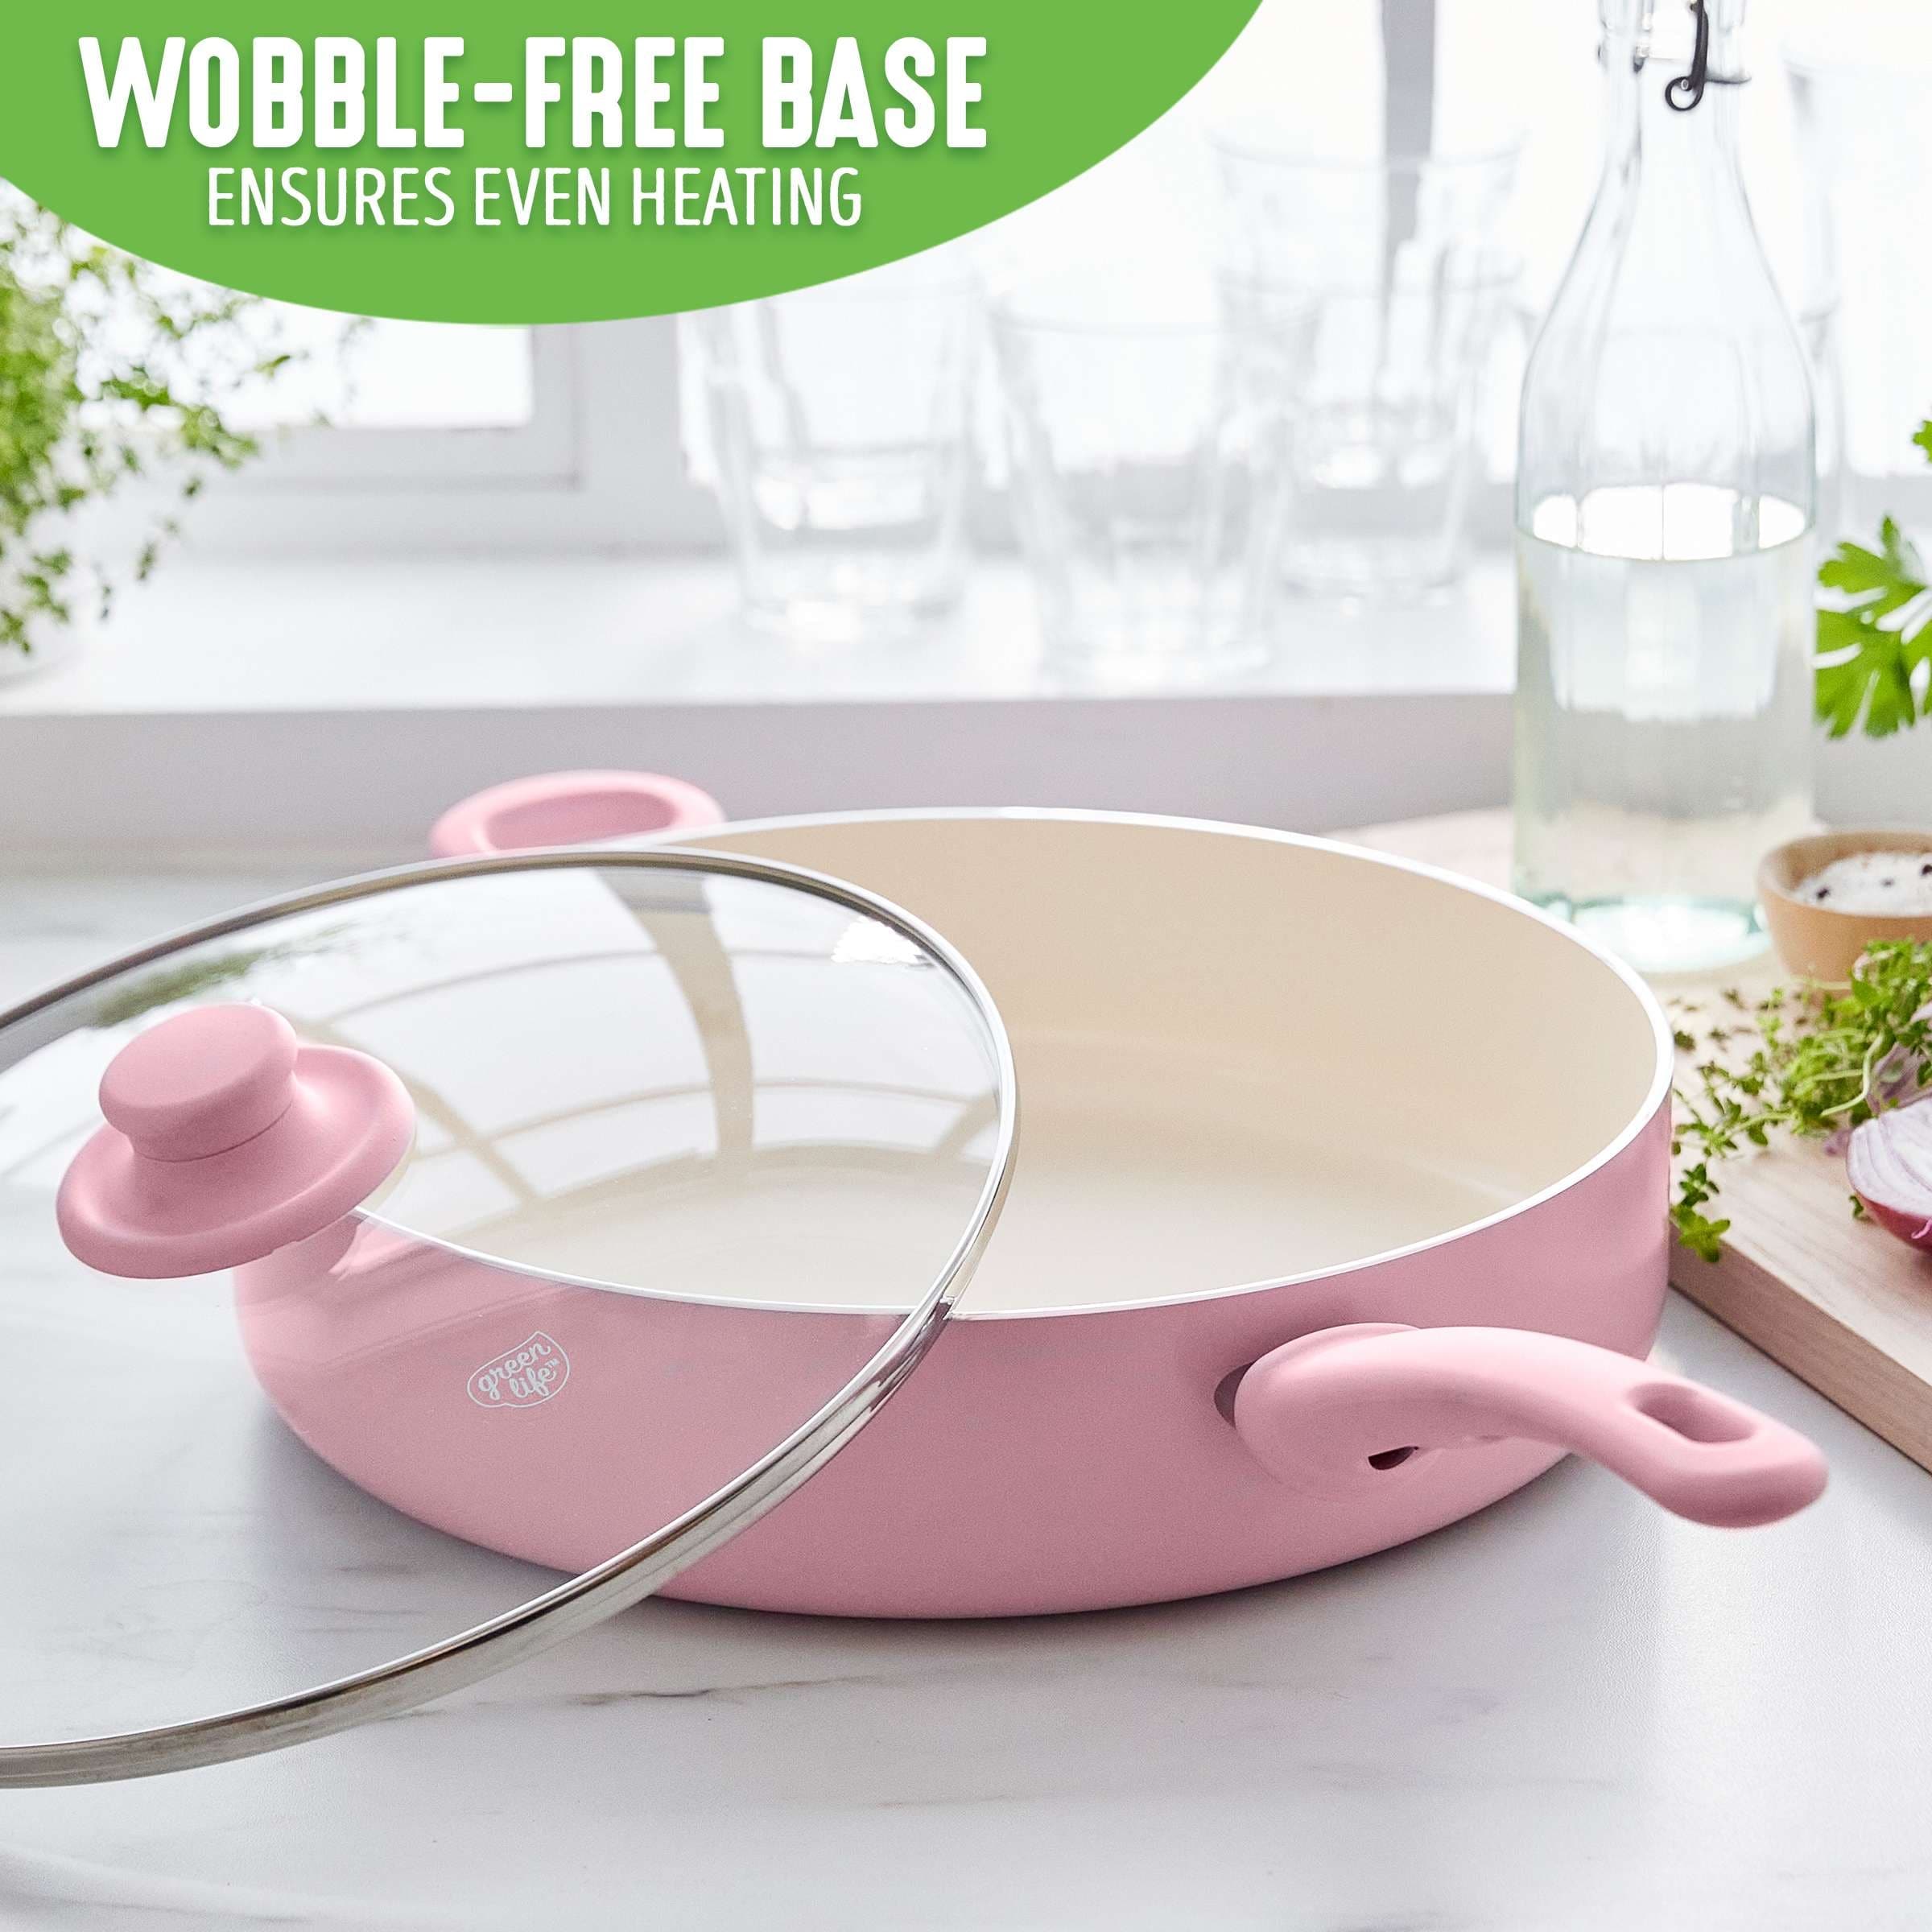 https://ak1.ostkcdn.com/images/products/is/images/direct/51343fa074fab05ab63c28693918270662573630/GreenLife-Soft-Grip-5Qt-Saute-Pan-w--Lid.jpg